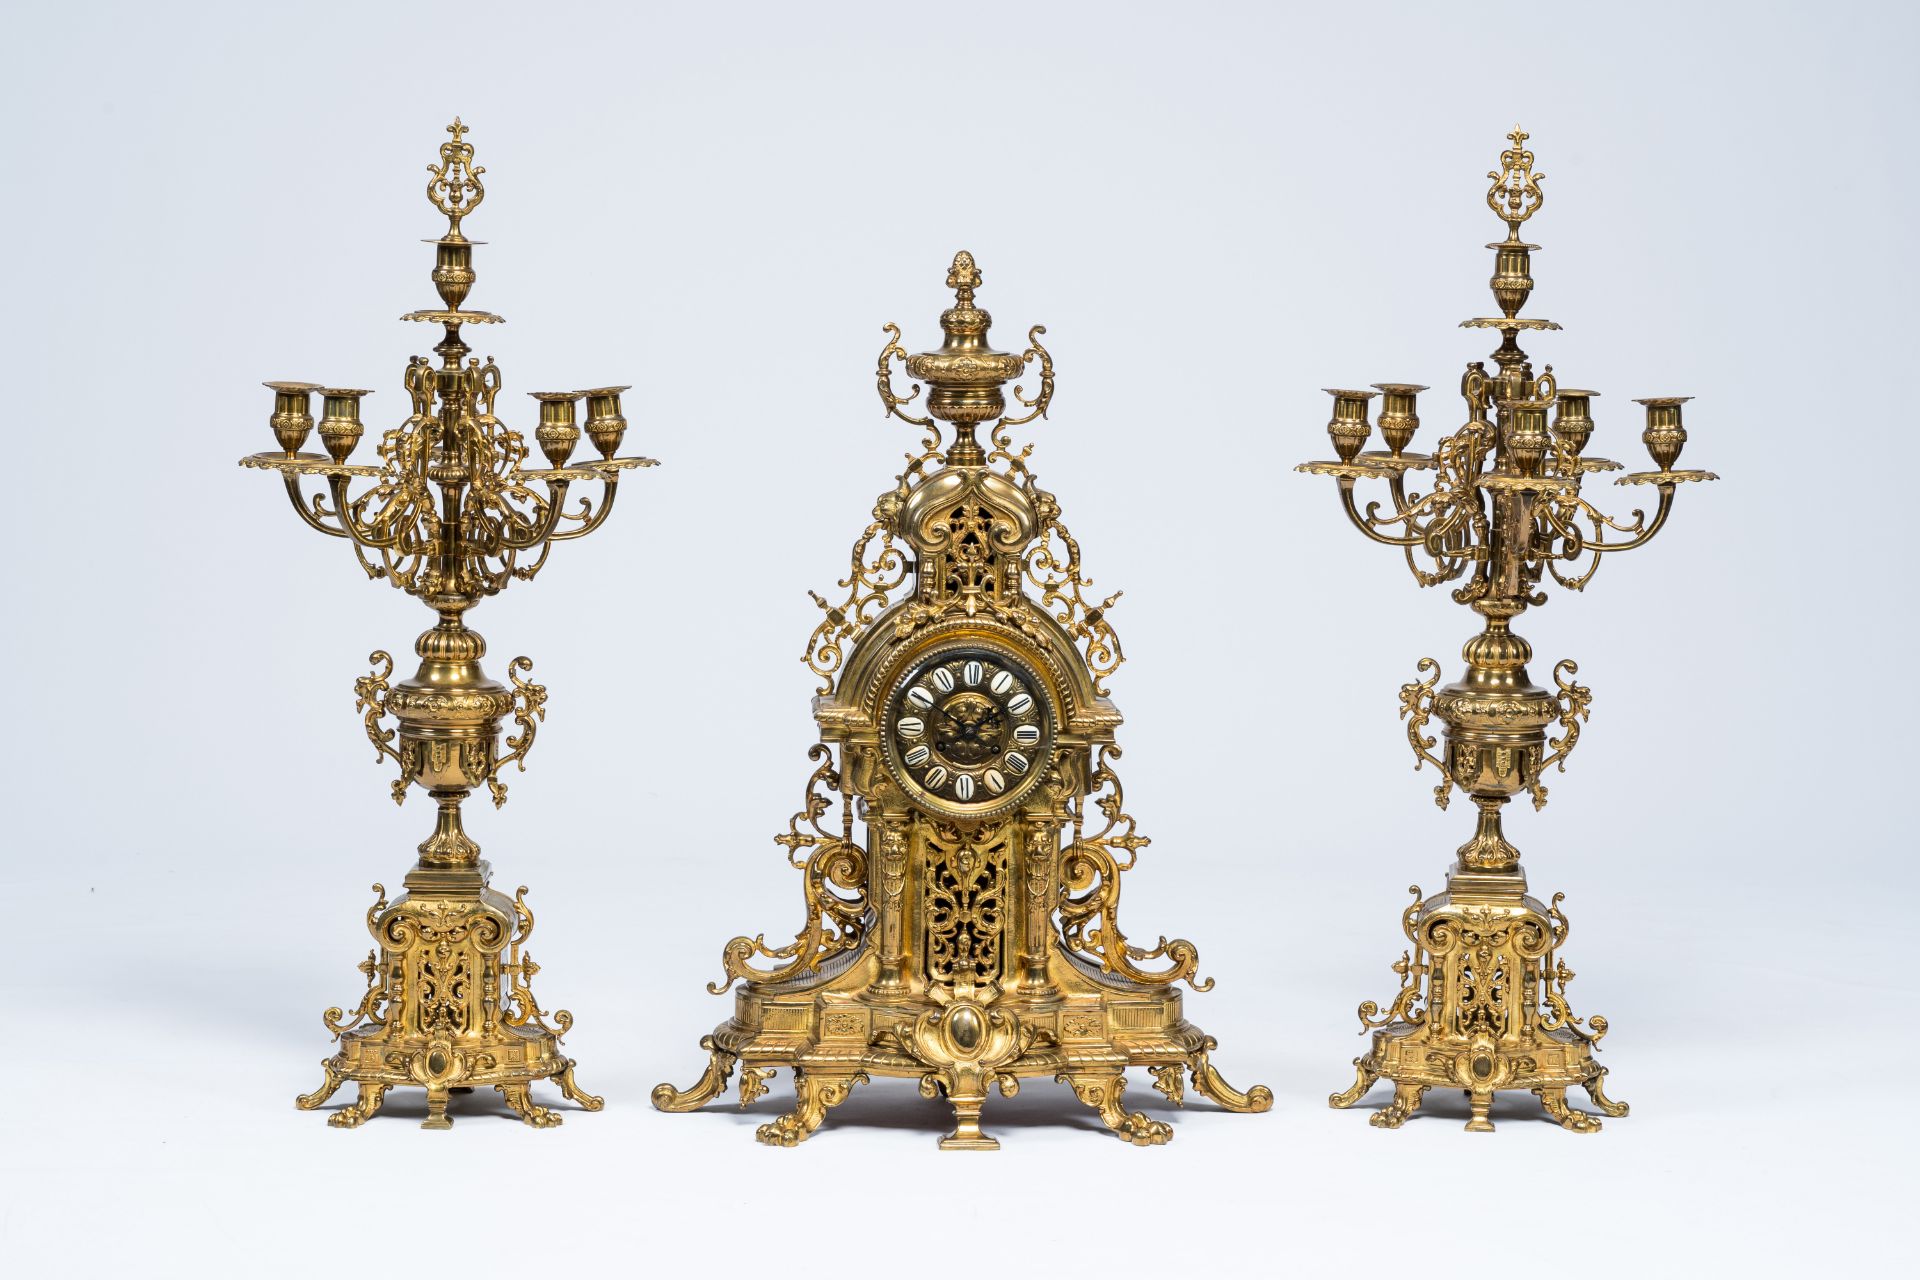 A large Belgian-French Baroque revival gilt brass three-piece clock garniture, late 19th C.